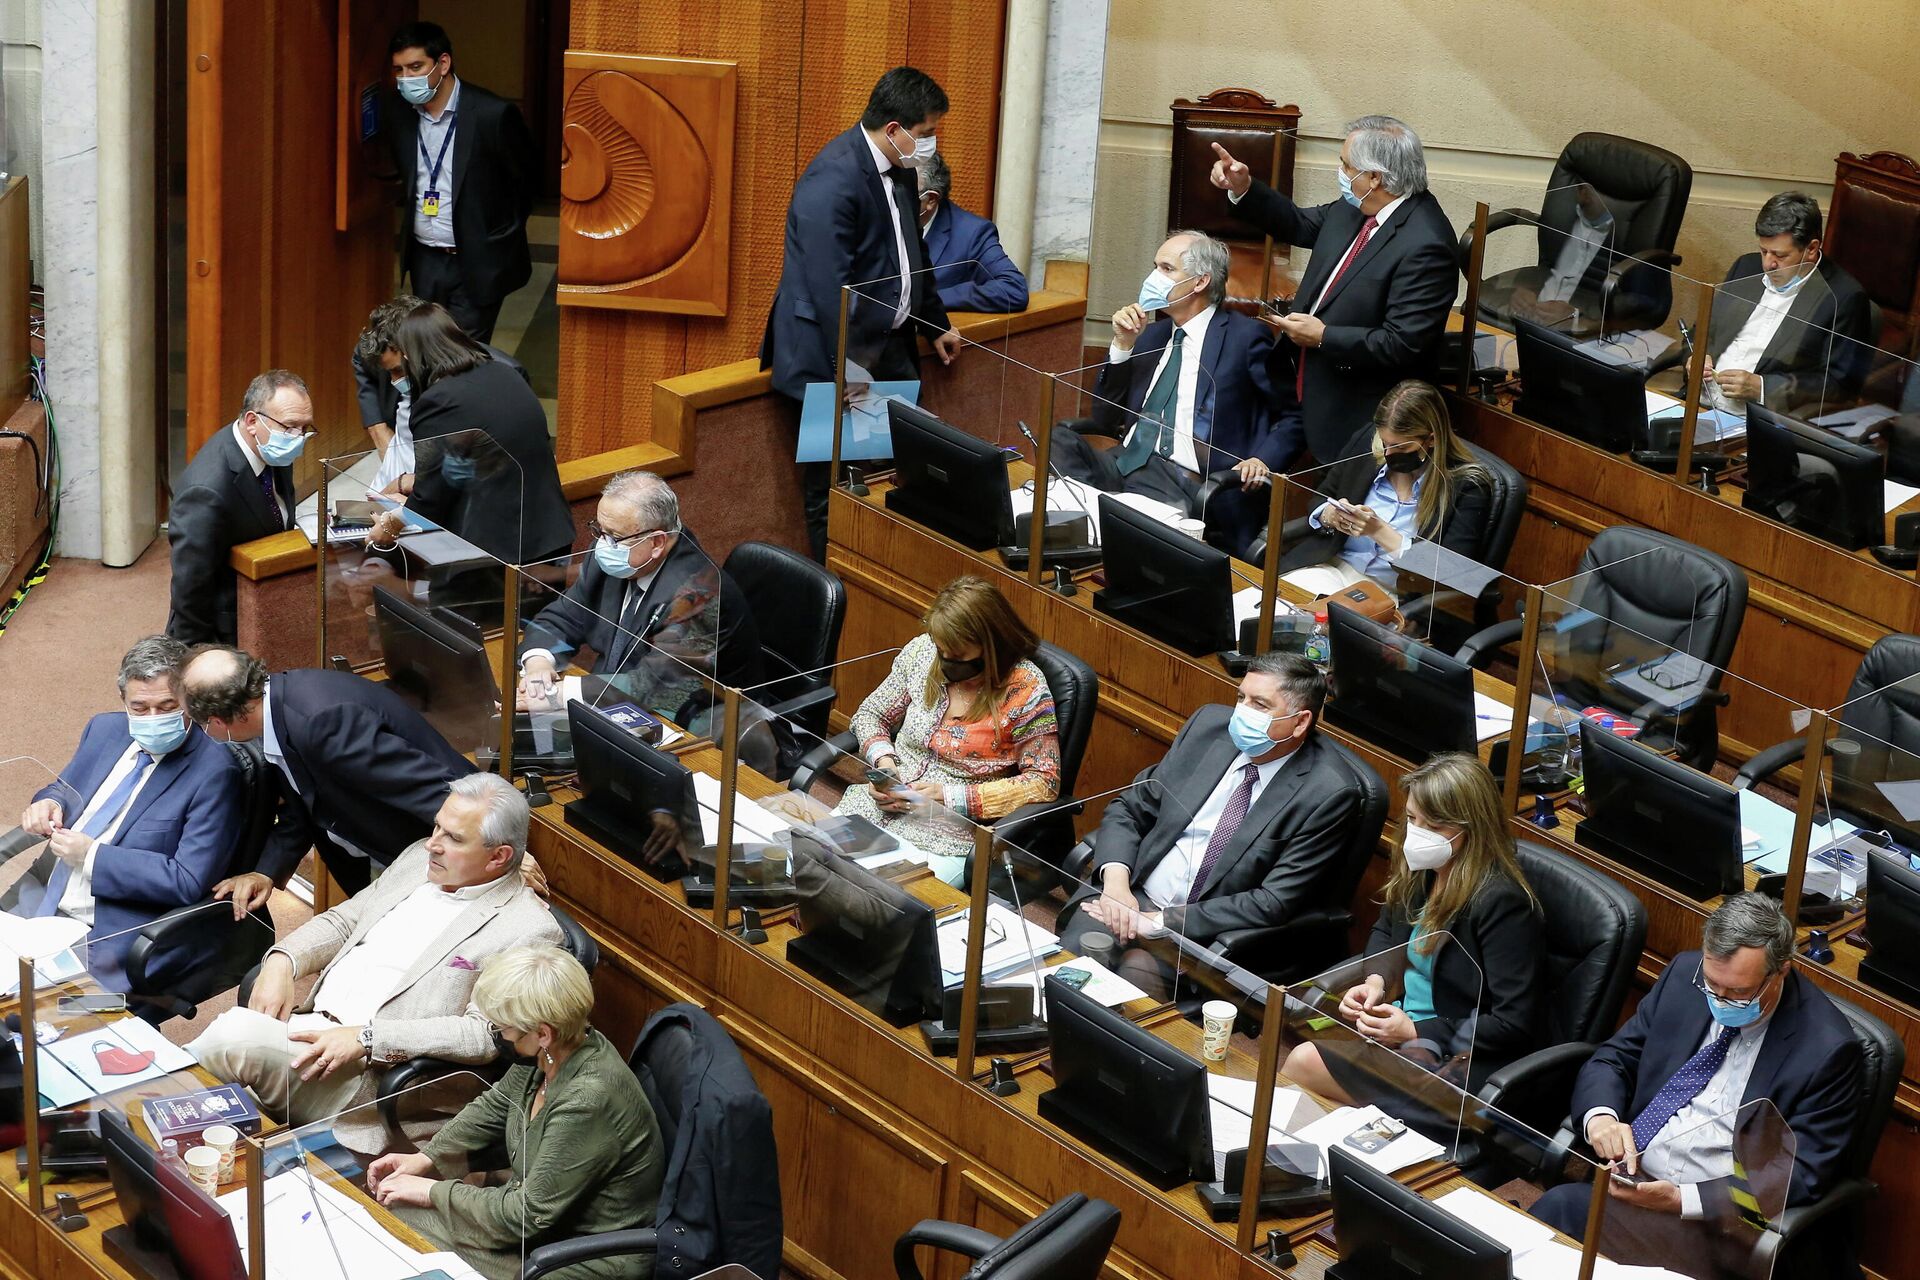 Chile's senators gather to vote on a motion to impeach President Sebastian Pinera over allegations of irregularities in the sale of a mining firm, in Valparaiso, Chile November 16, 2021 - Sputnik International, 1920, 17.11.2021